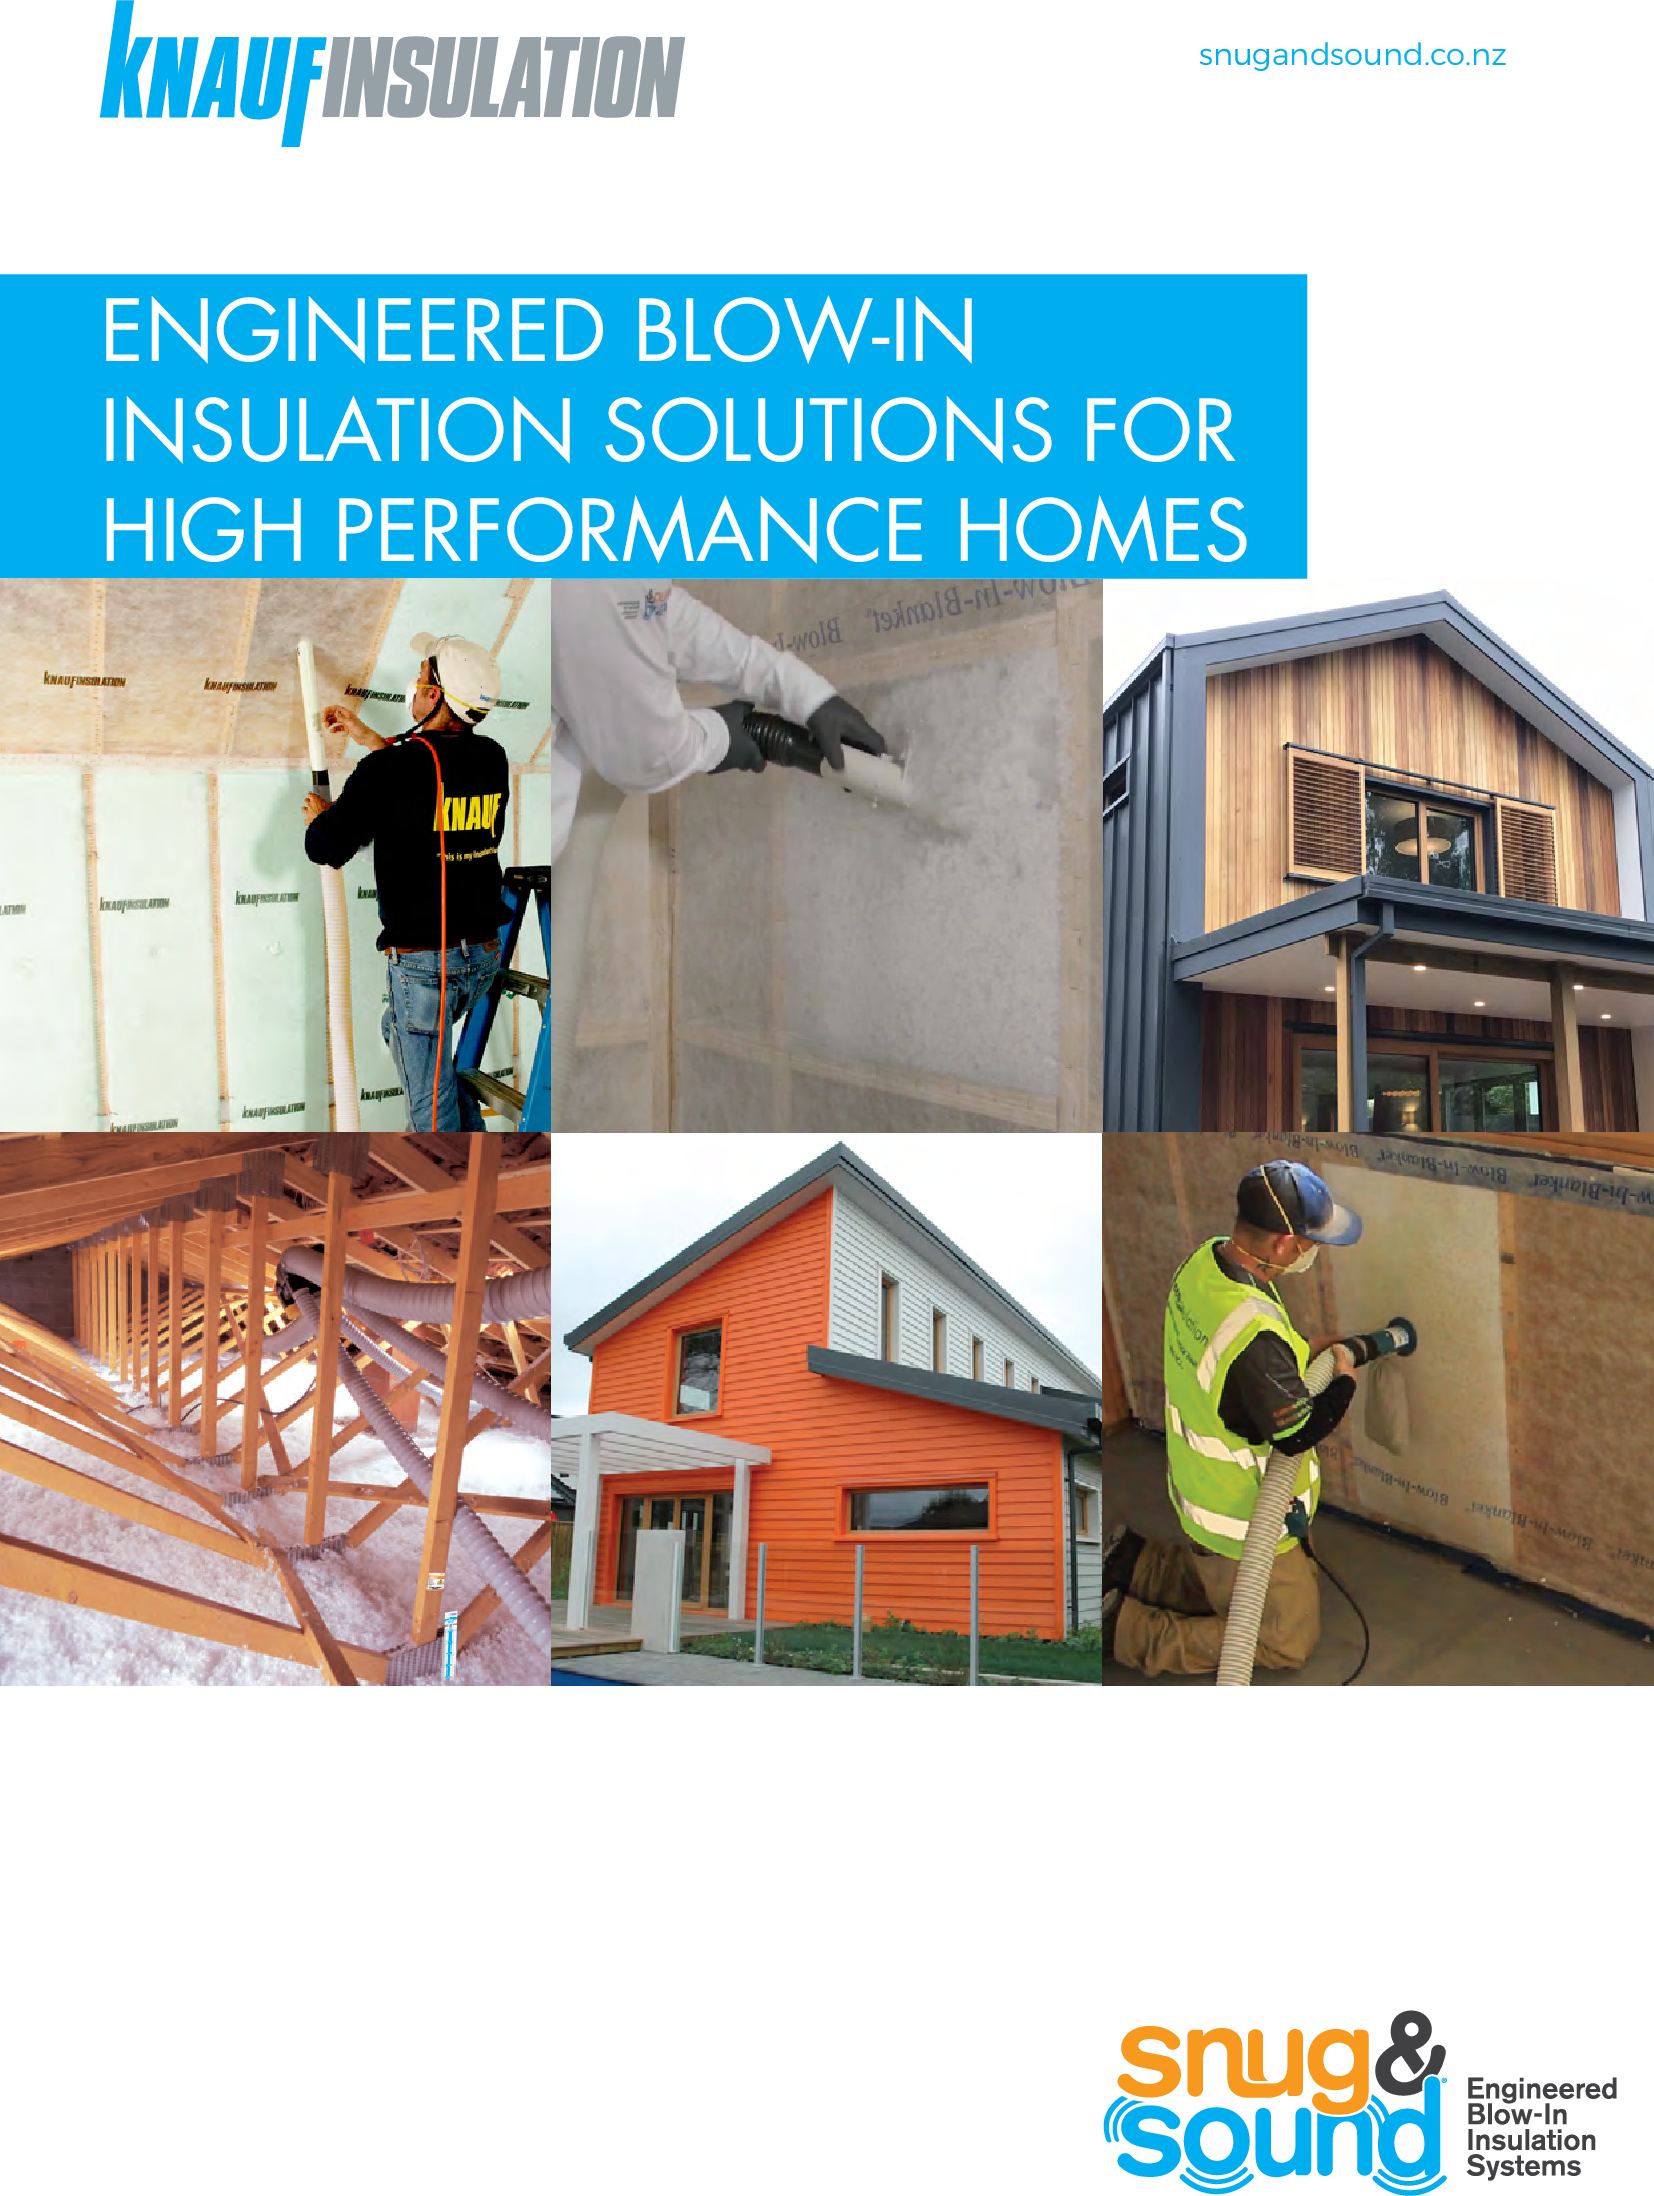 High Performance insulation solutions brochure